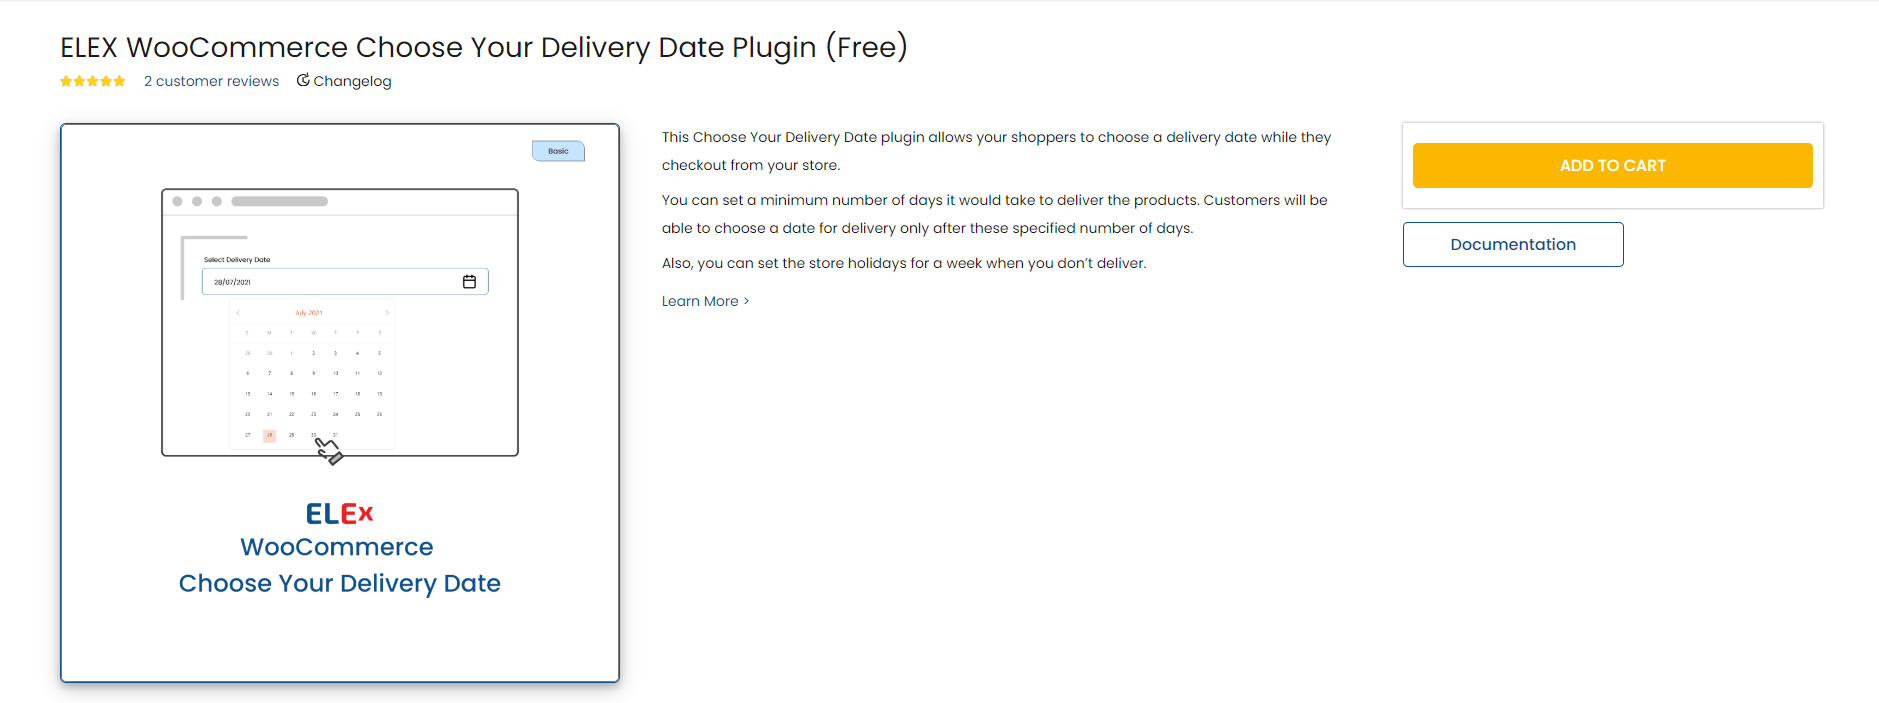 ELEX WooCommerce Choose Your Delivery Date Plugin